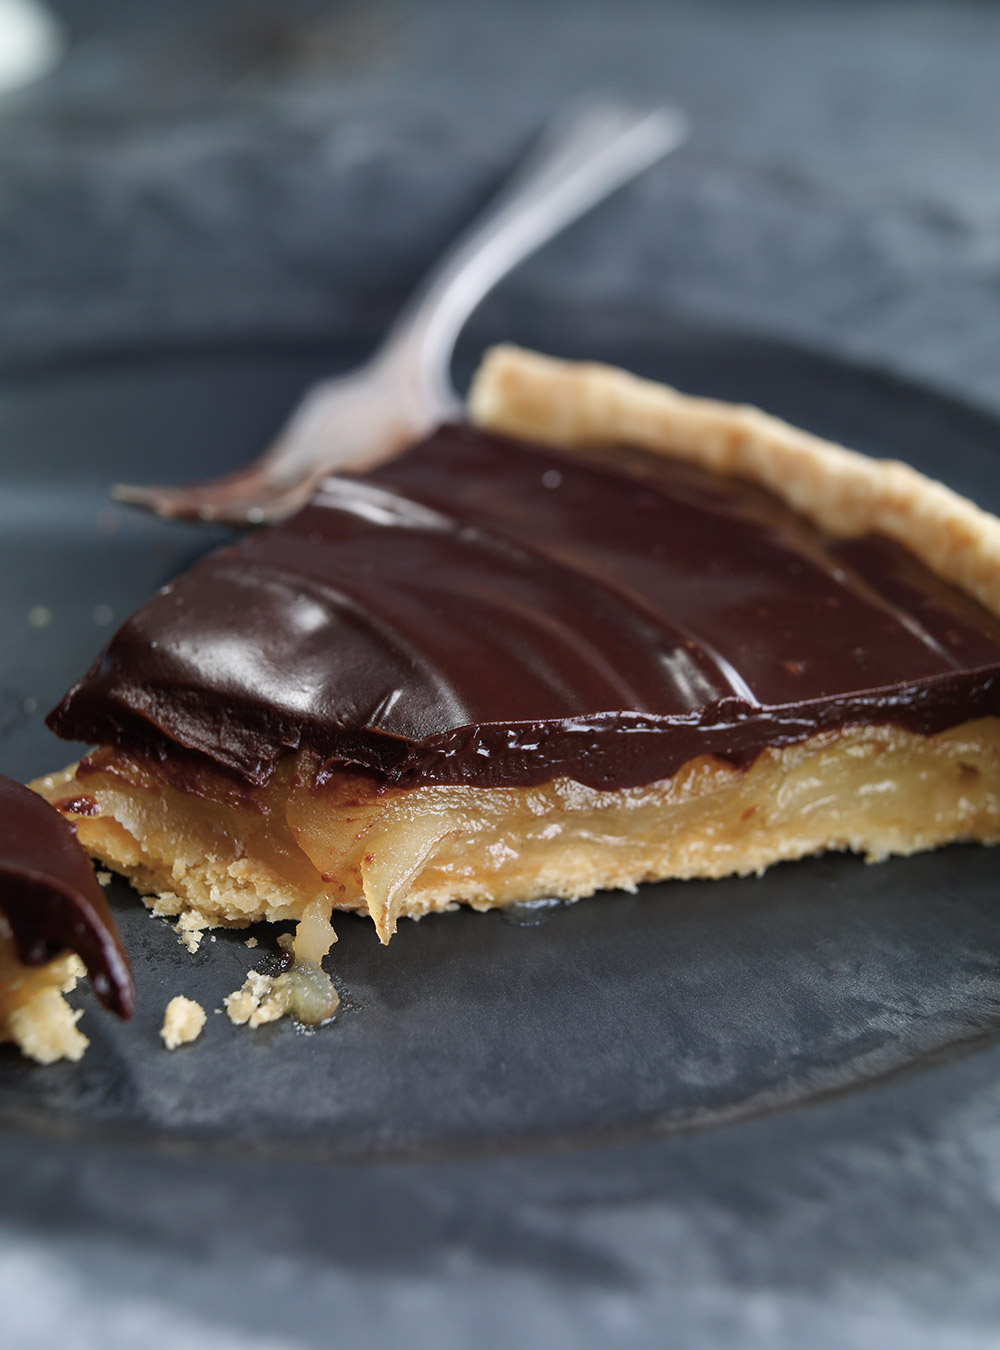 Caramelized Pear and Chocolate Tart